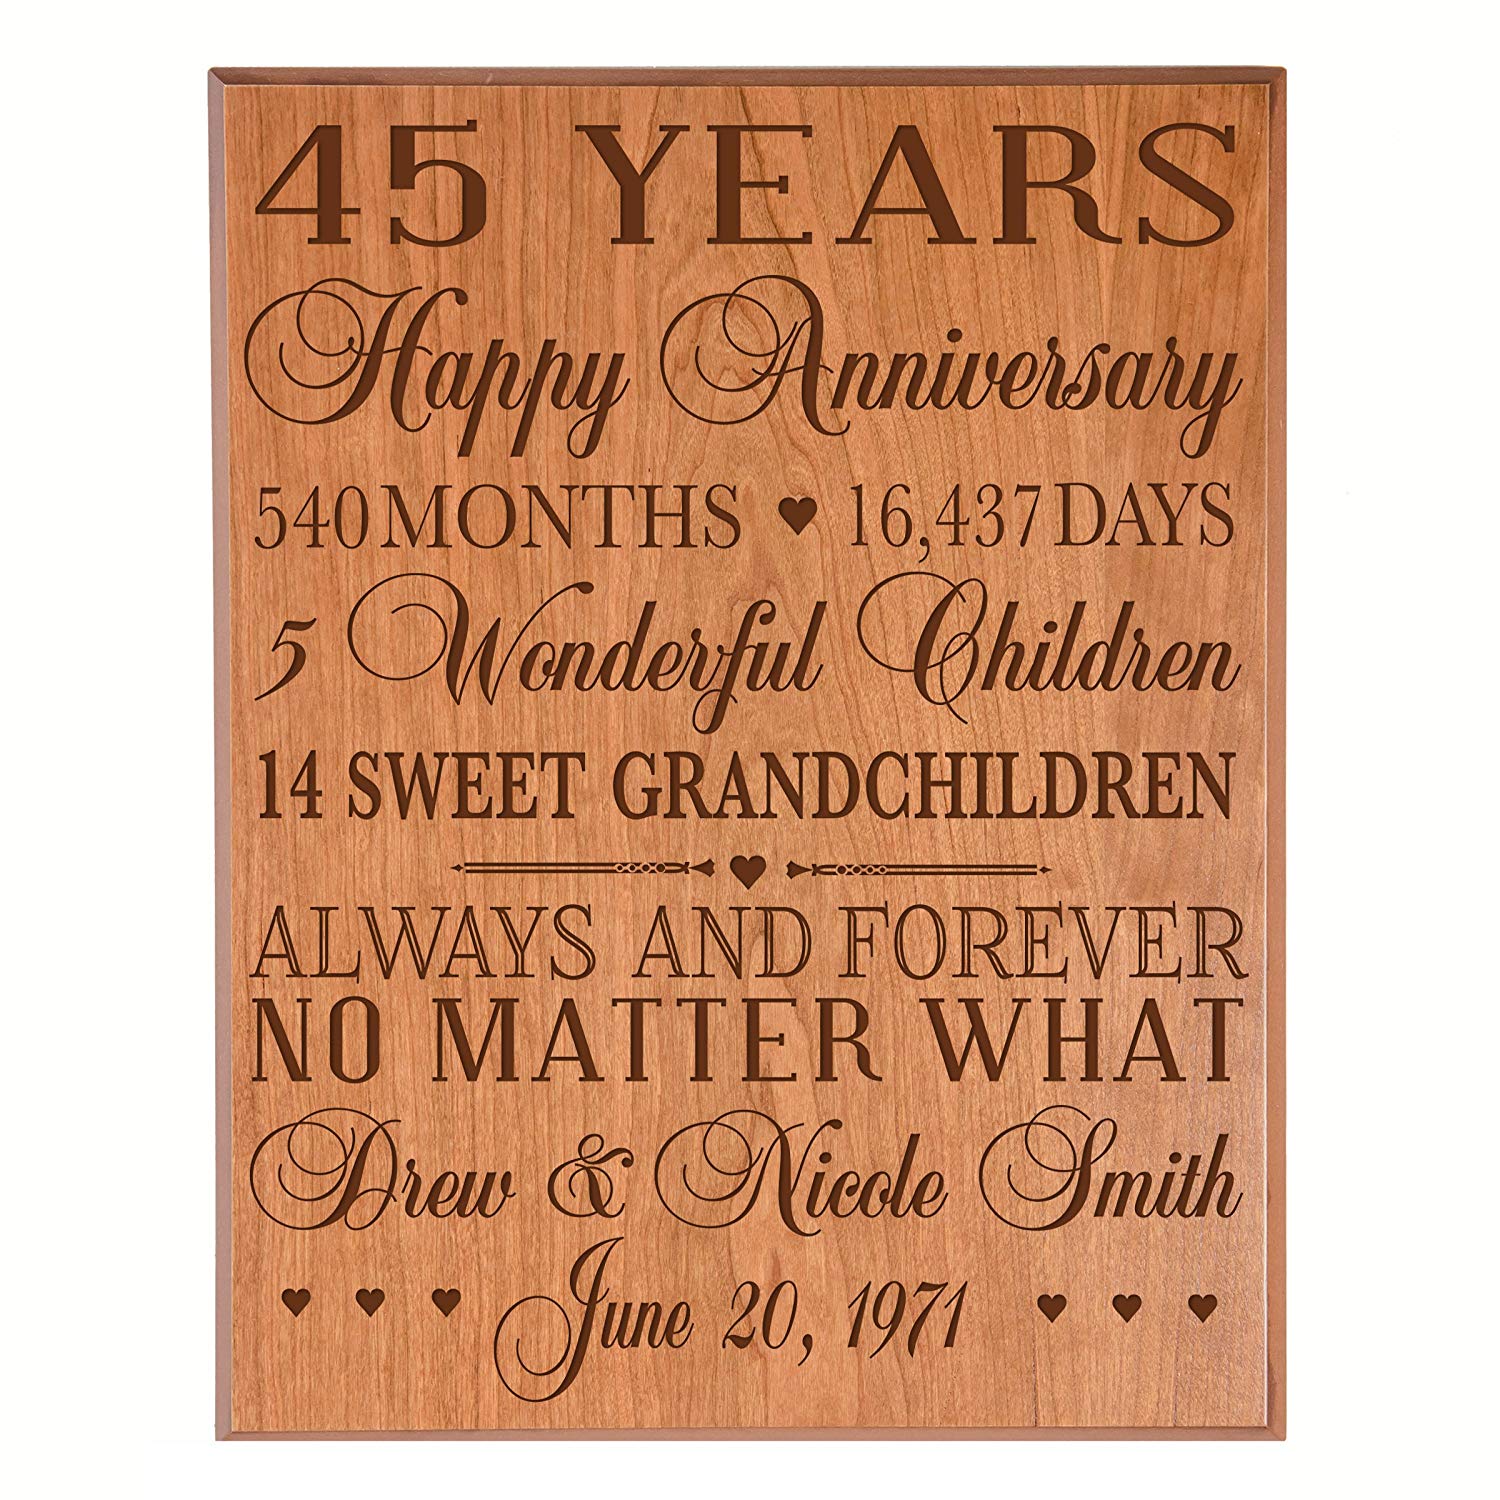 Personalized 45th Anniversary Wall Plaque - Always And Forever - LifeSong Milestones